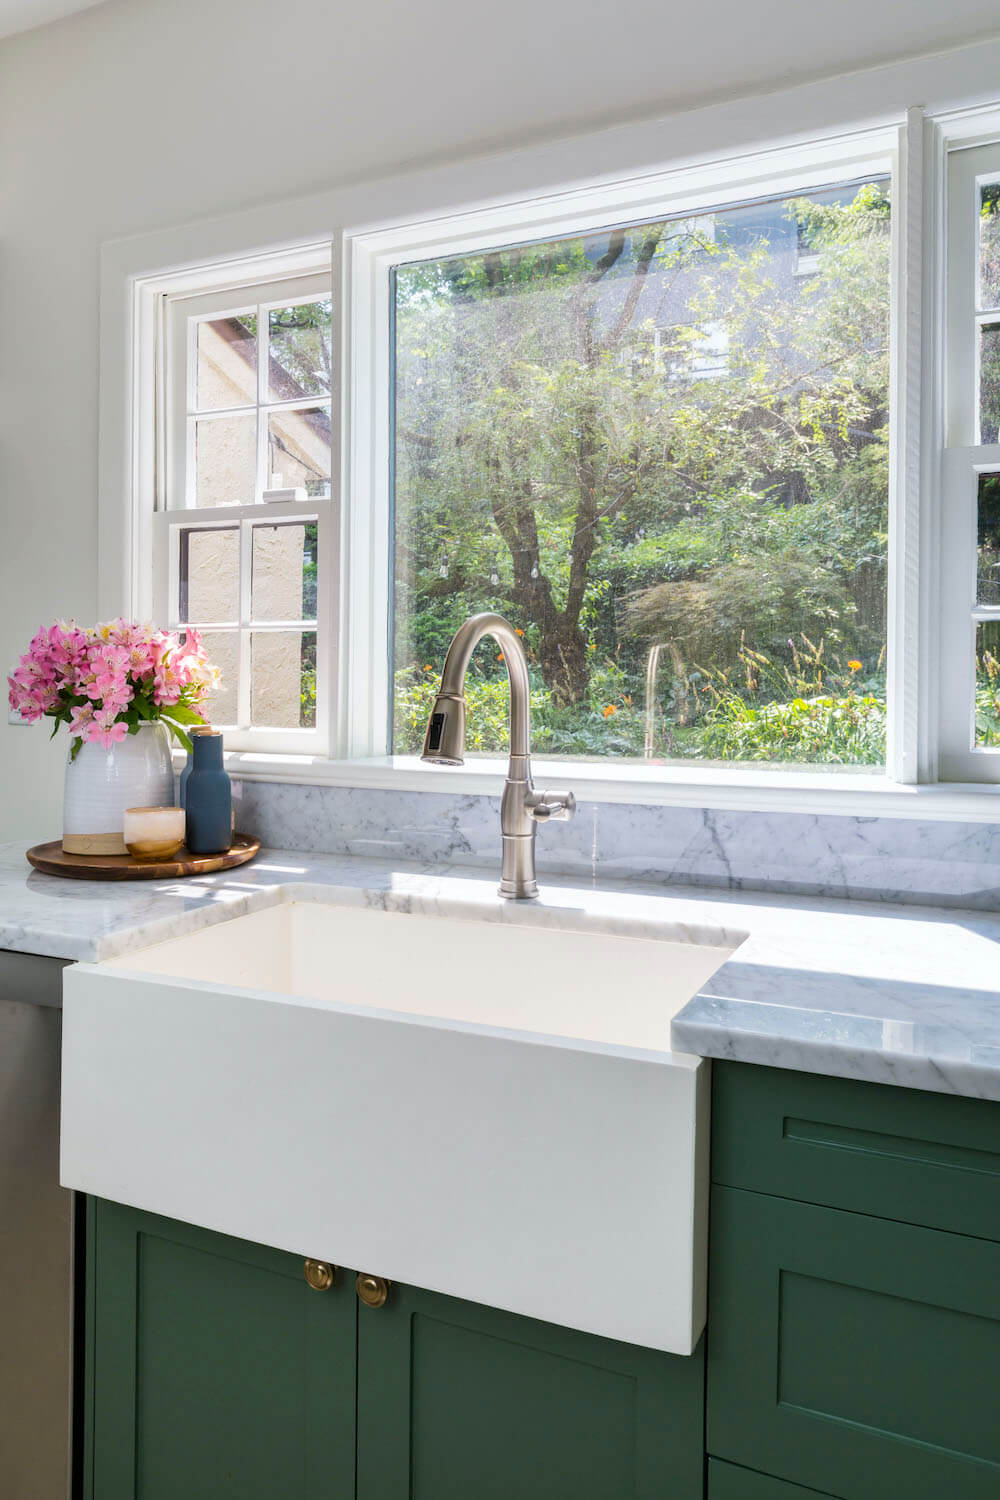 Kitchen sink with gray marble countertops